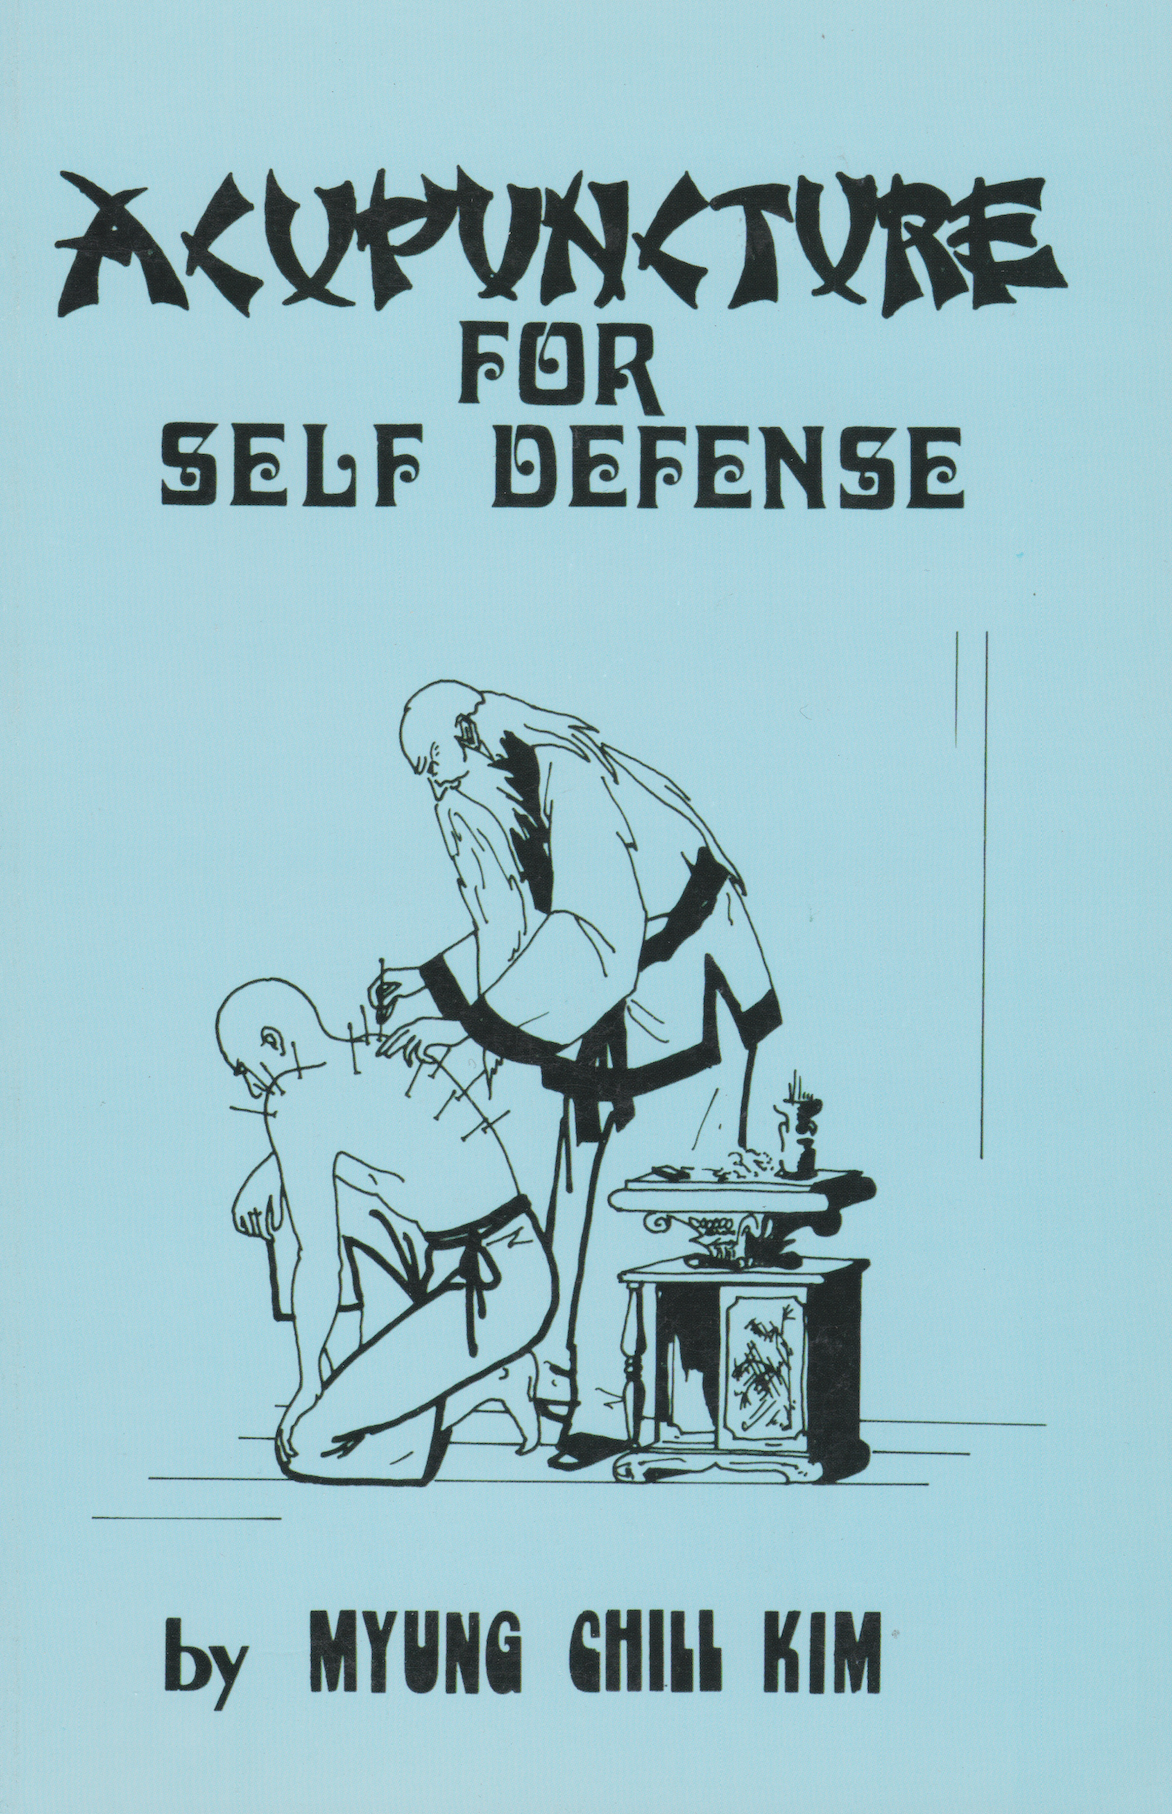 Acupuncture for Self Defense Book by Myung Chill Kim